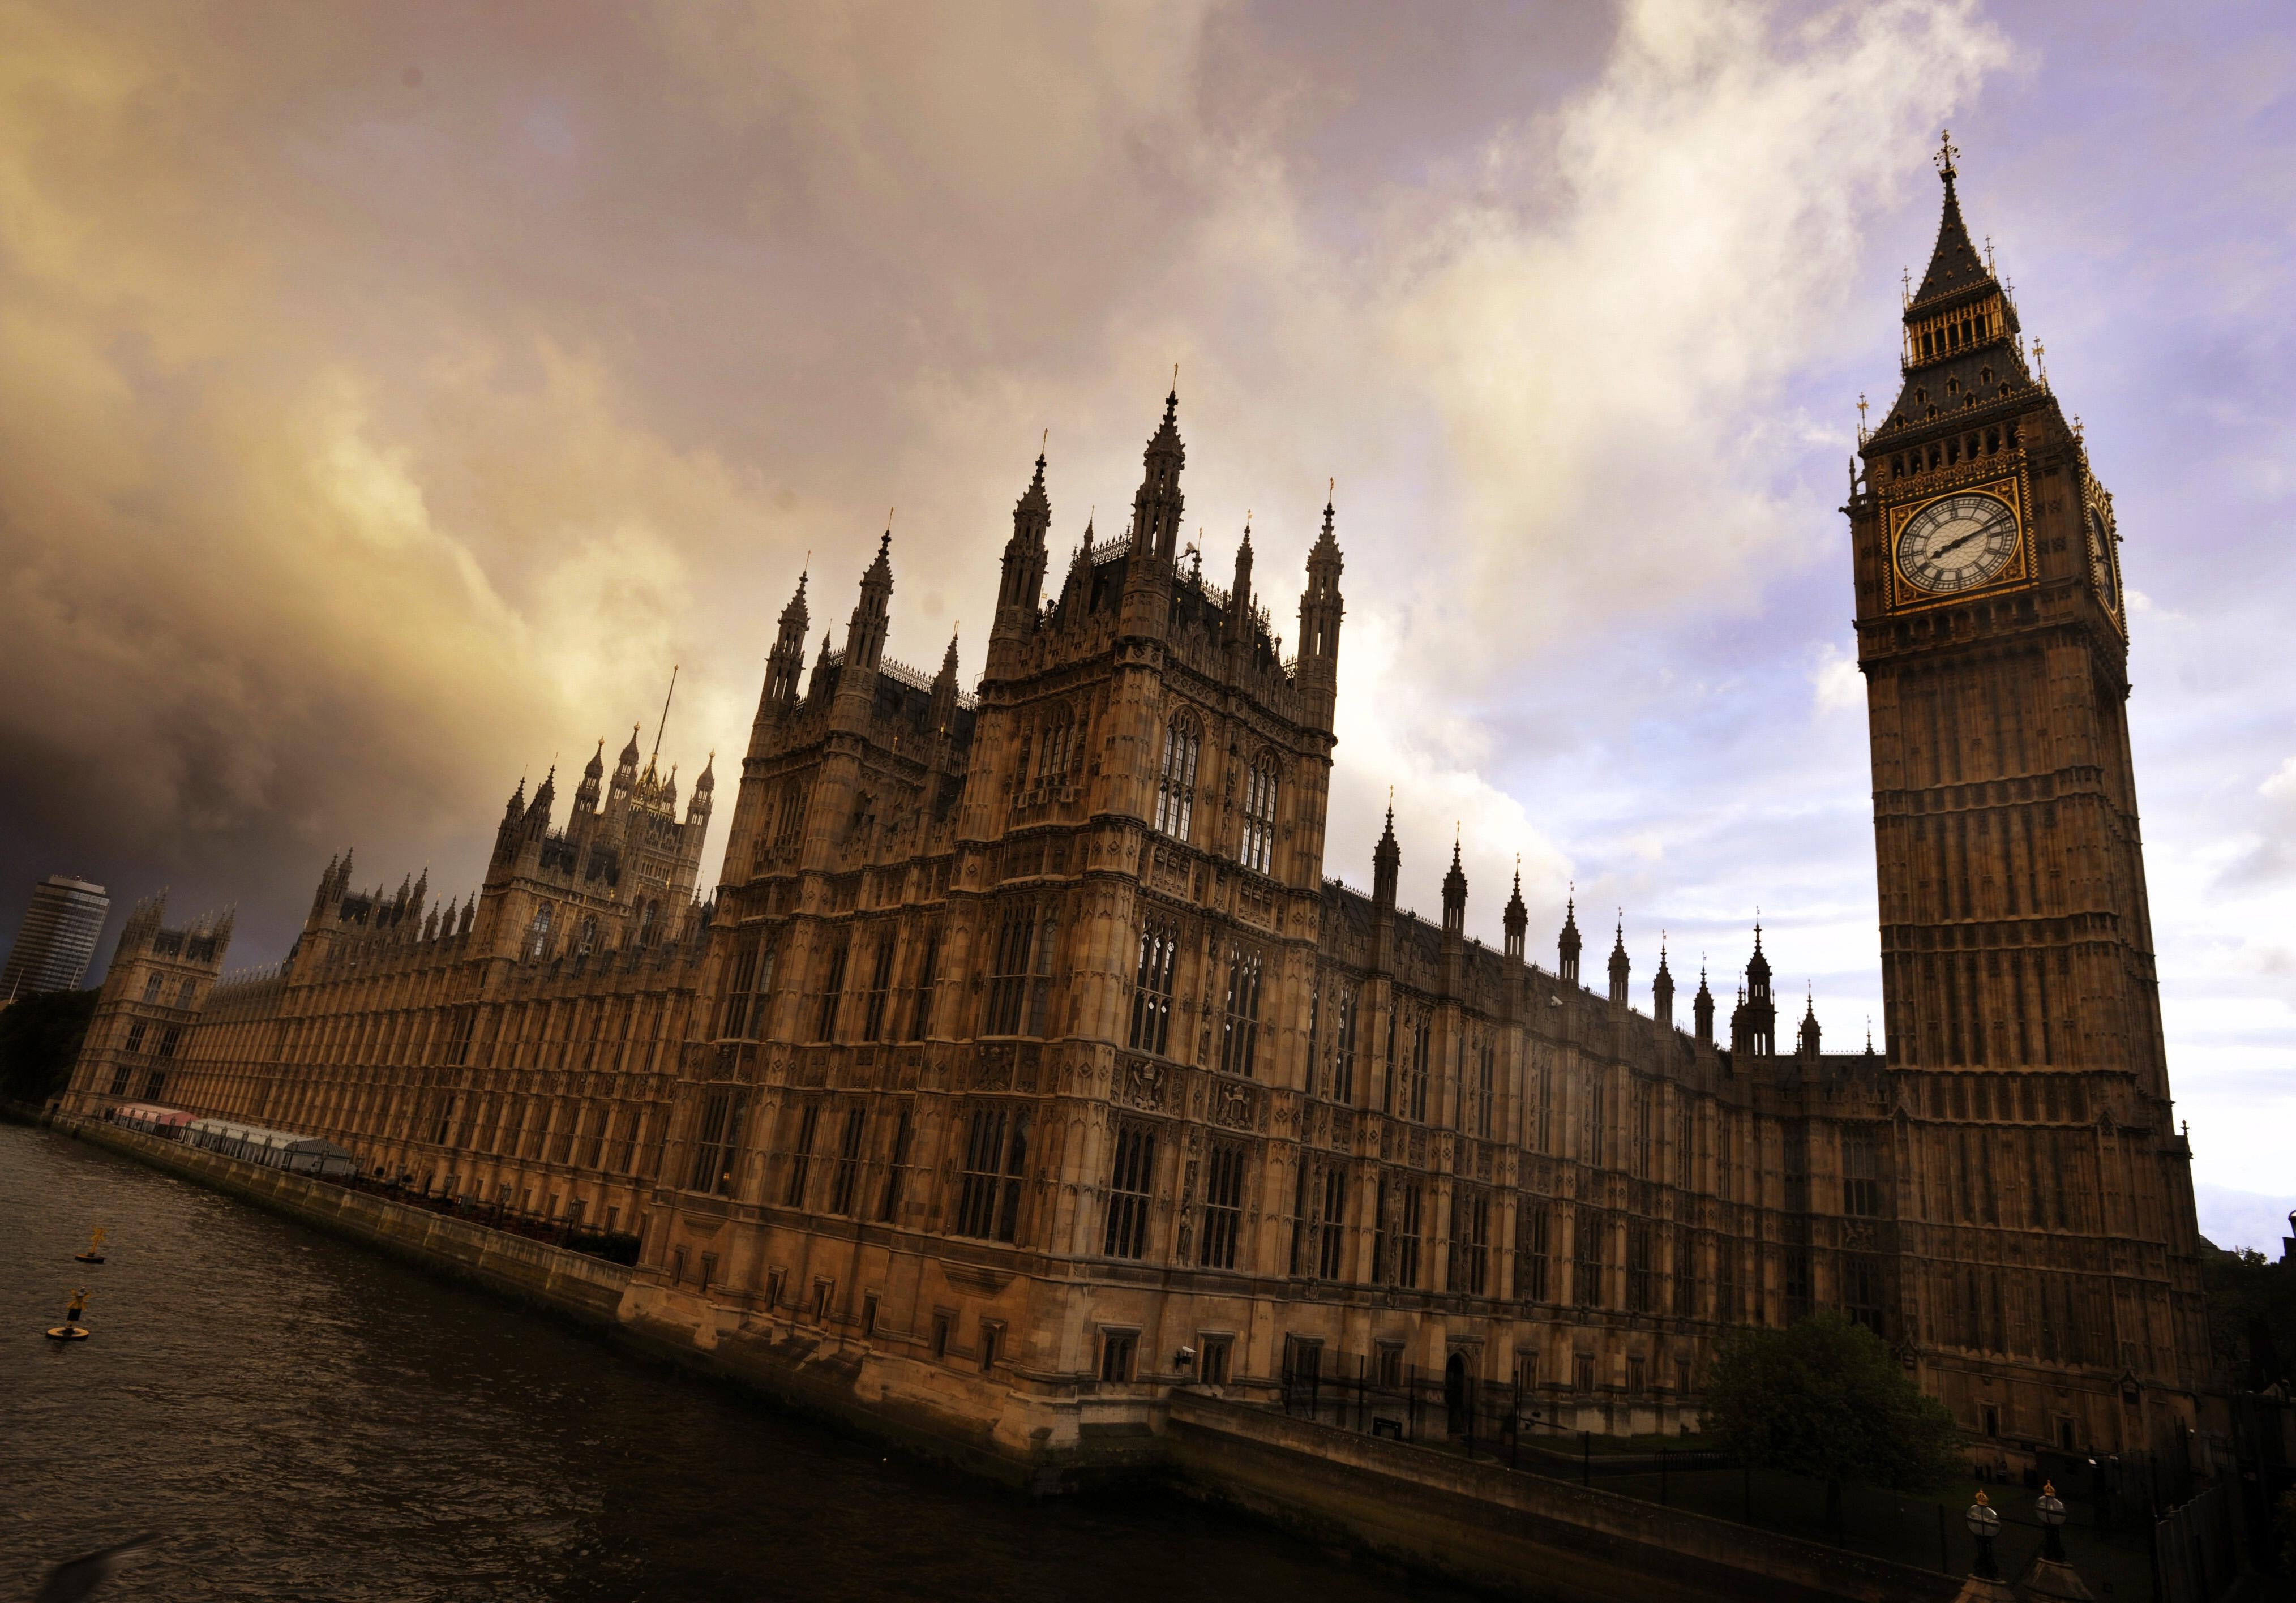 Powder plot: traces of cocaine have been found throughout parliament